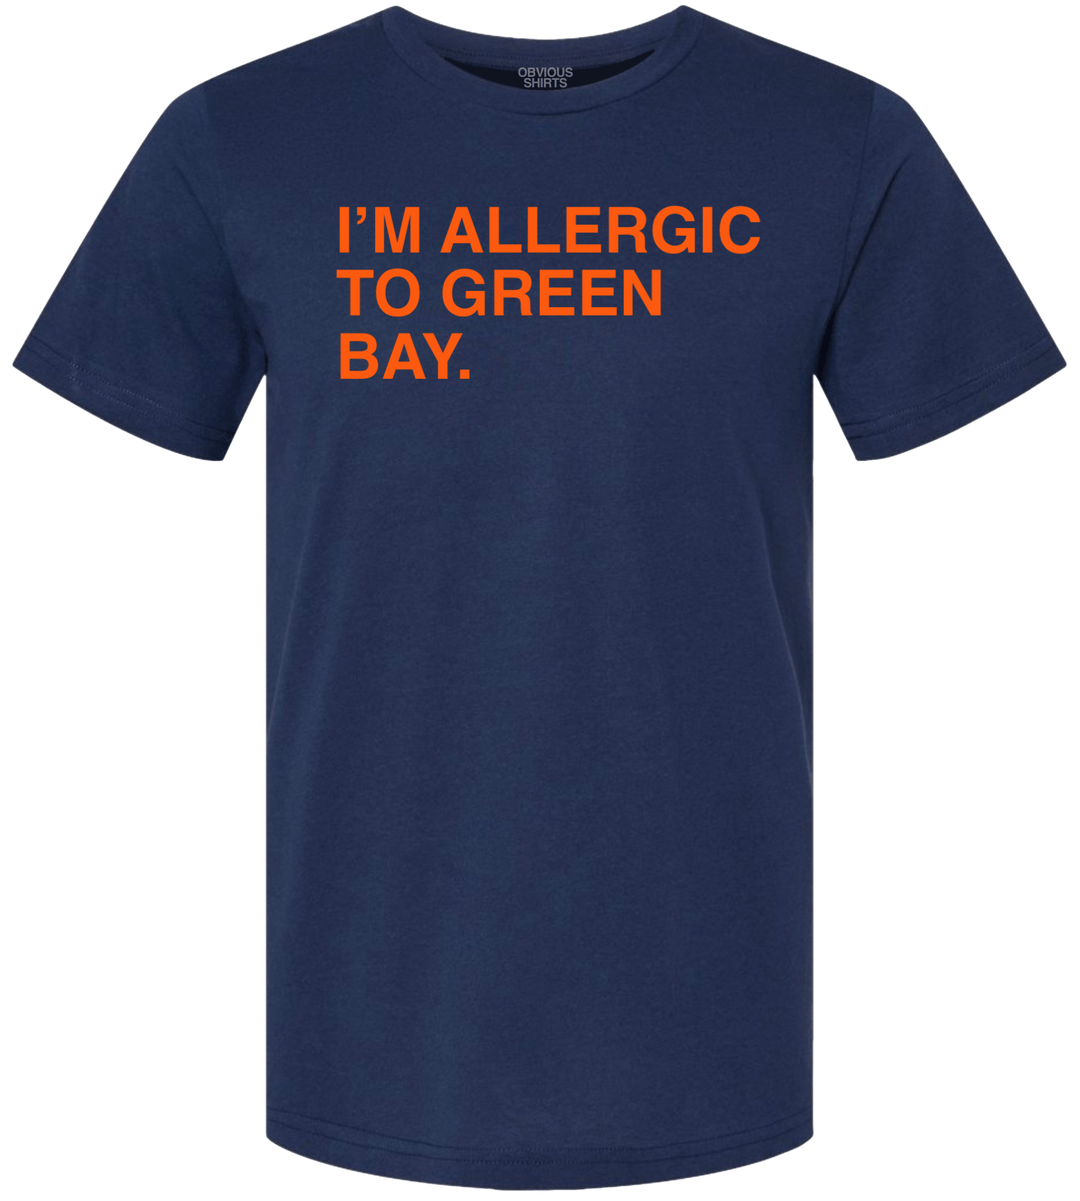 I'M ALLERGIC TO GREEN BAY. - OBVIOUS SHIRTS